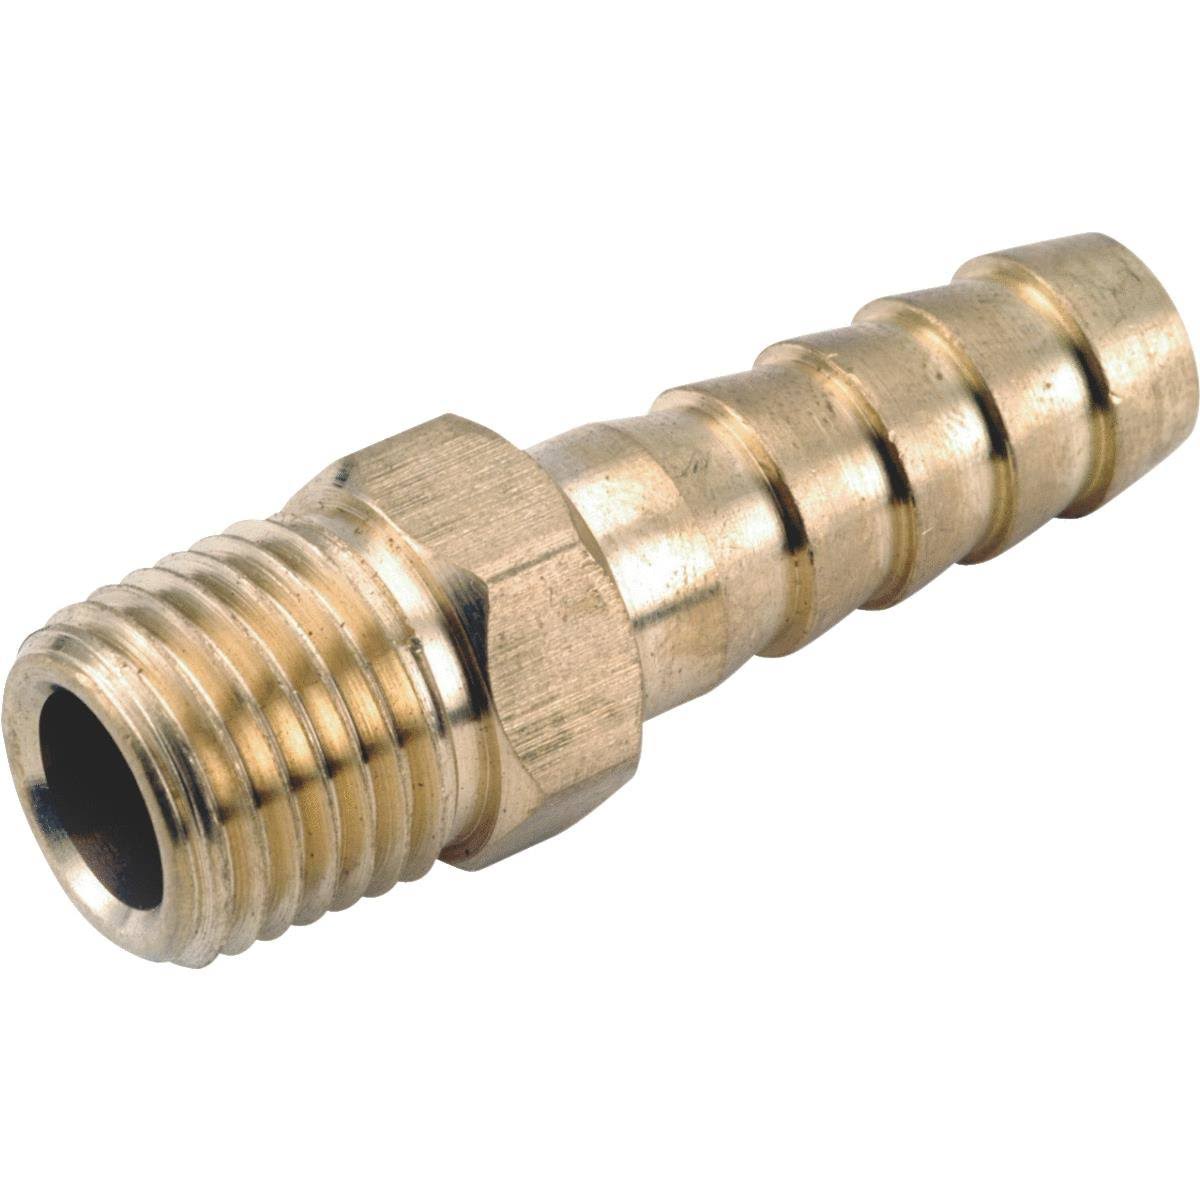 Anderson Metals Corp 757001-0202 Hose Barb - Brass